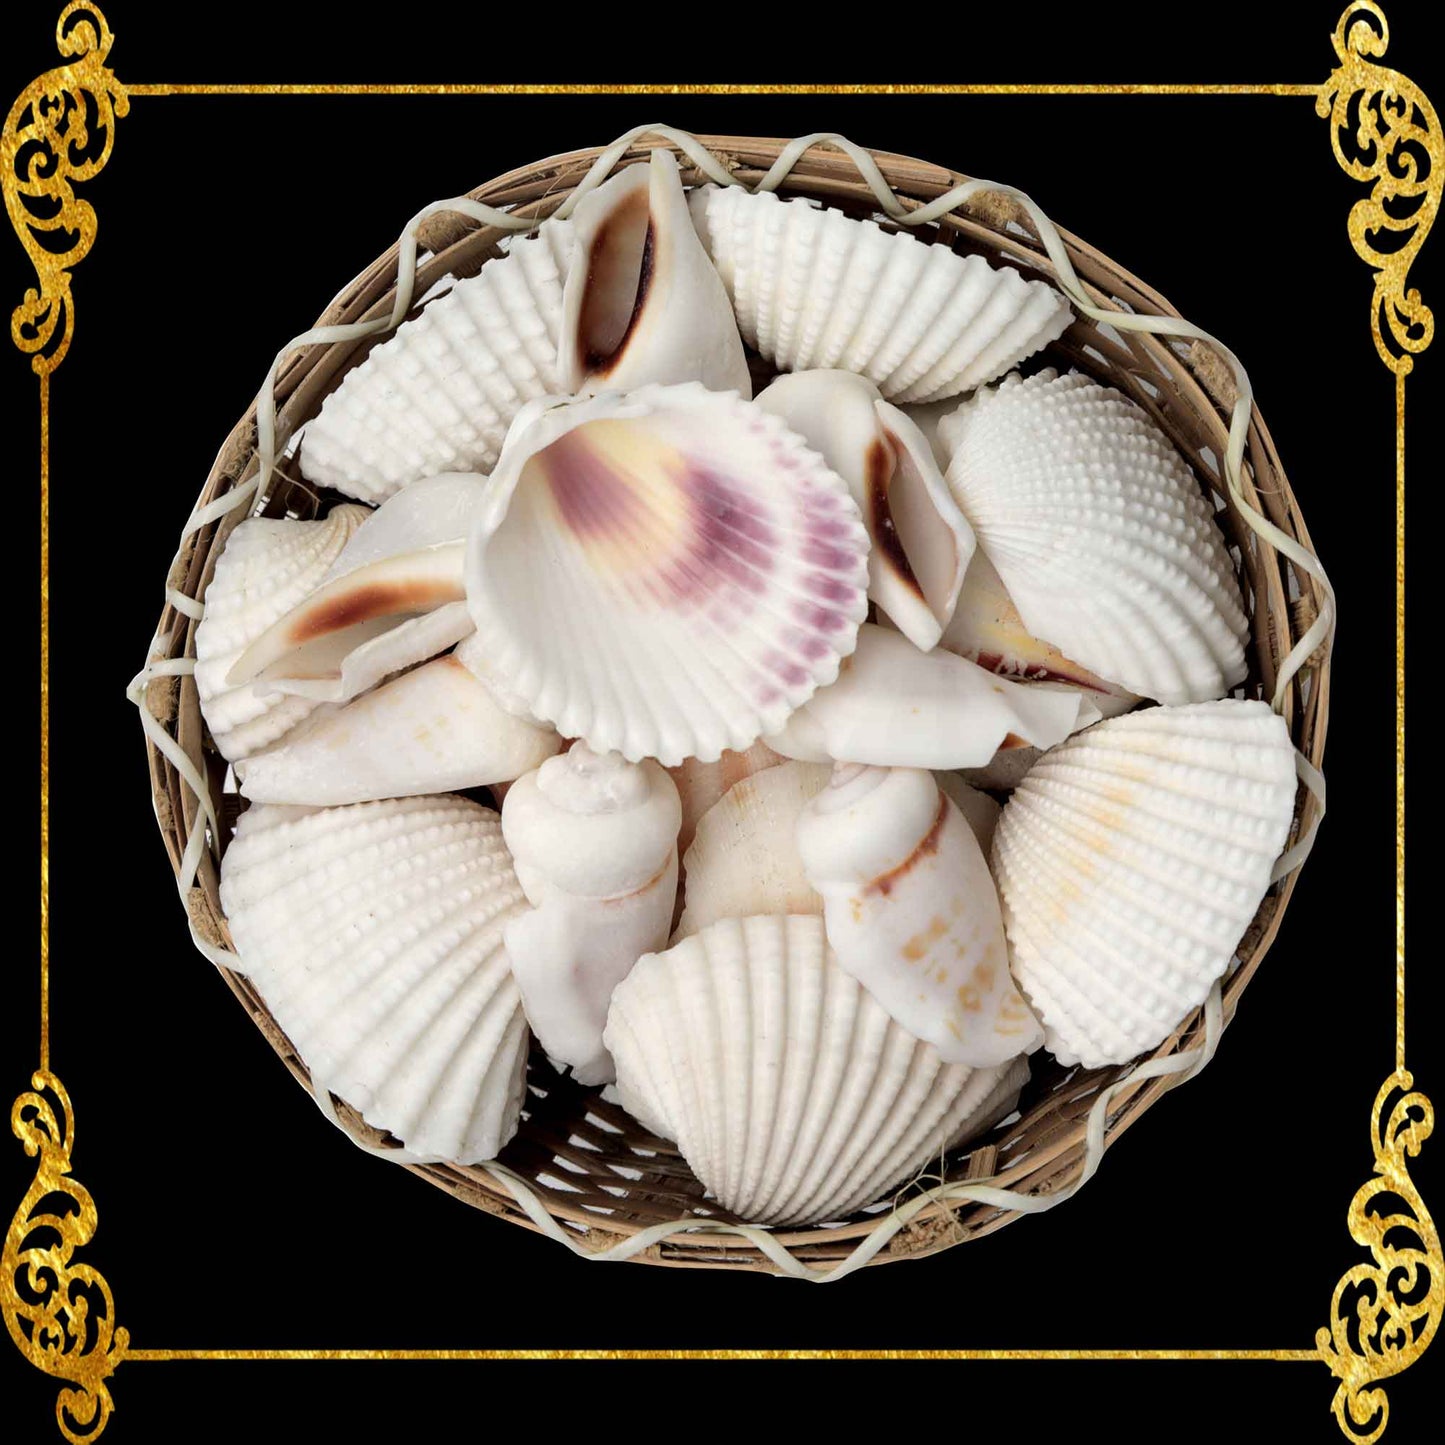 Mixed Sea Shell in a Wooden Basket | 5 Inches | White Clams and Conch